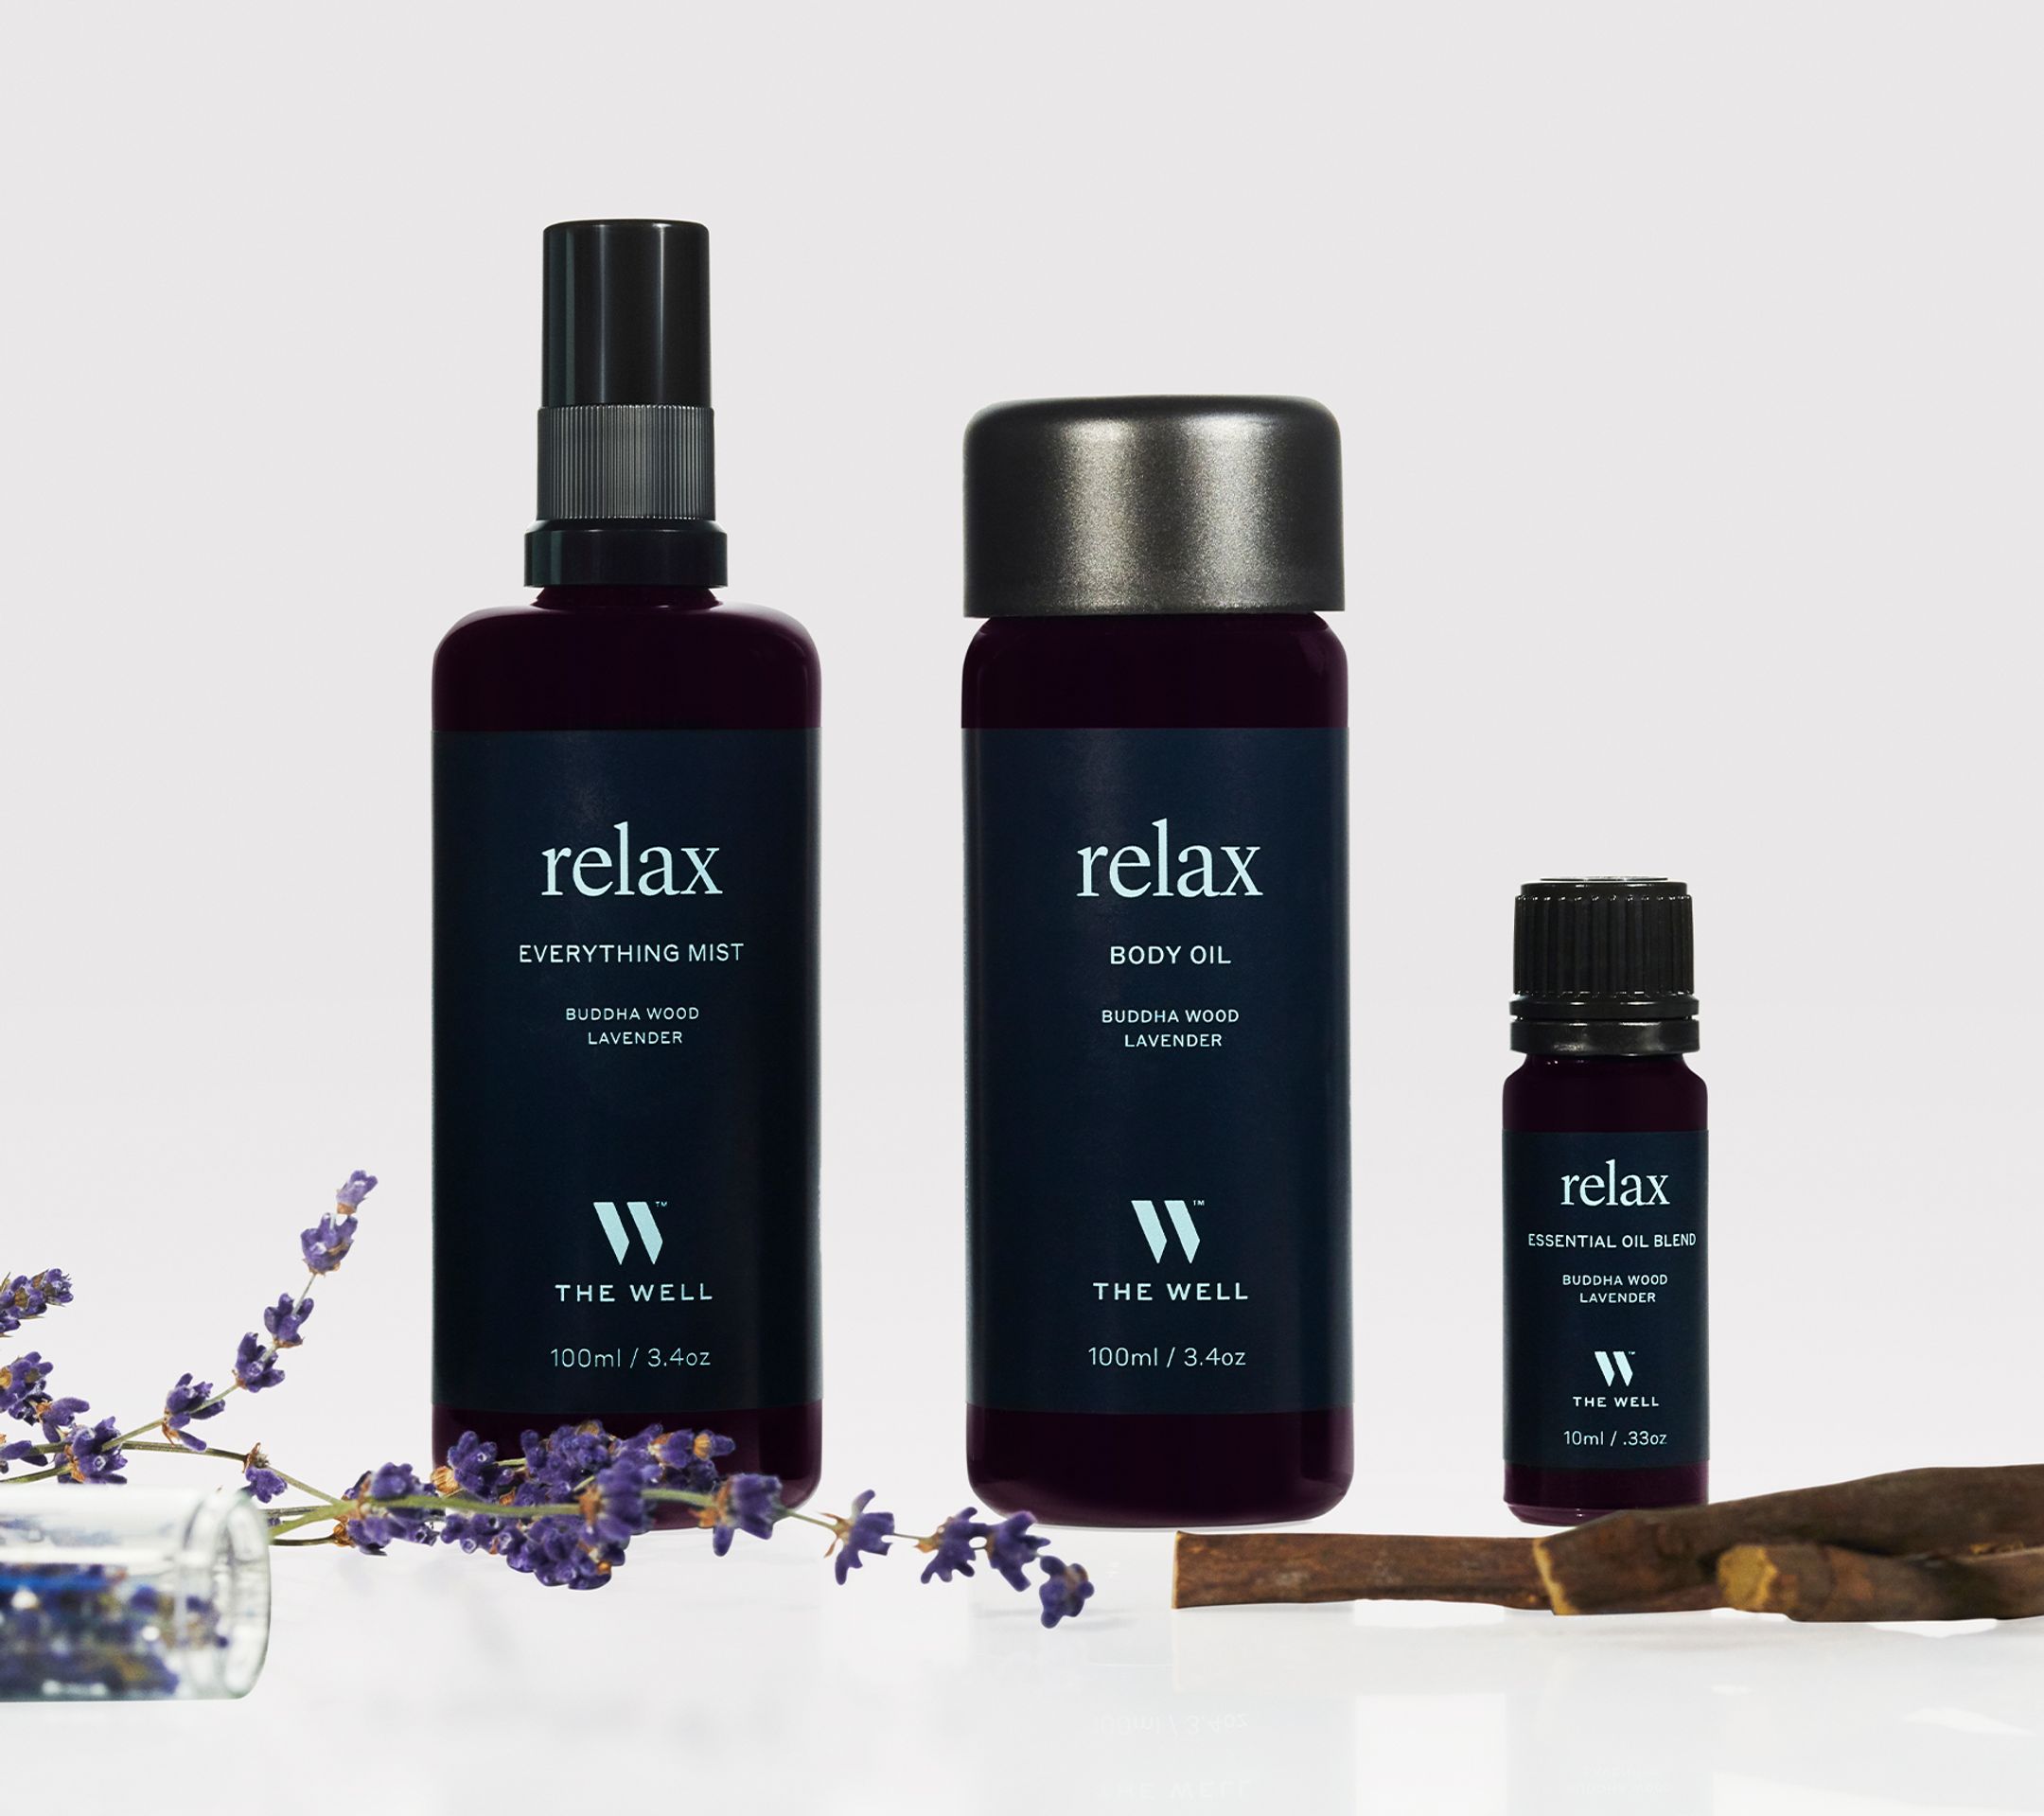 The Well Relax Bundle